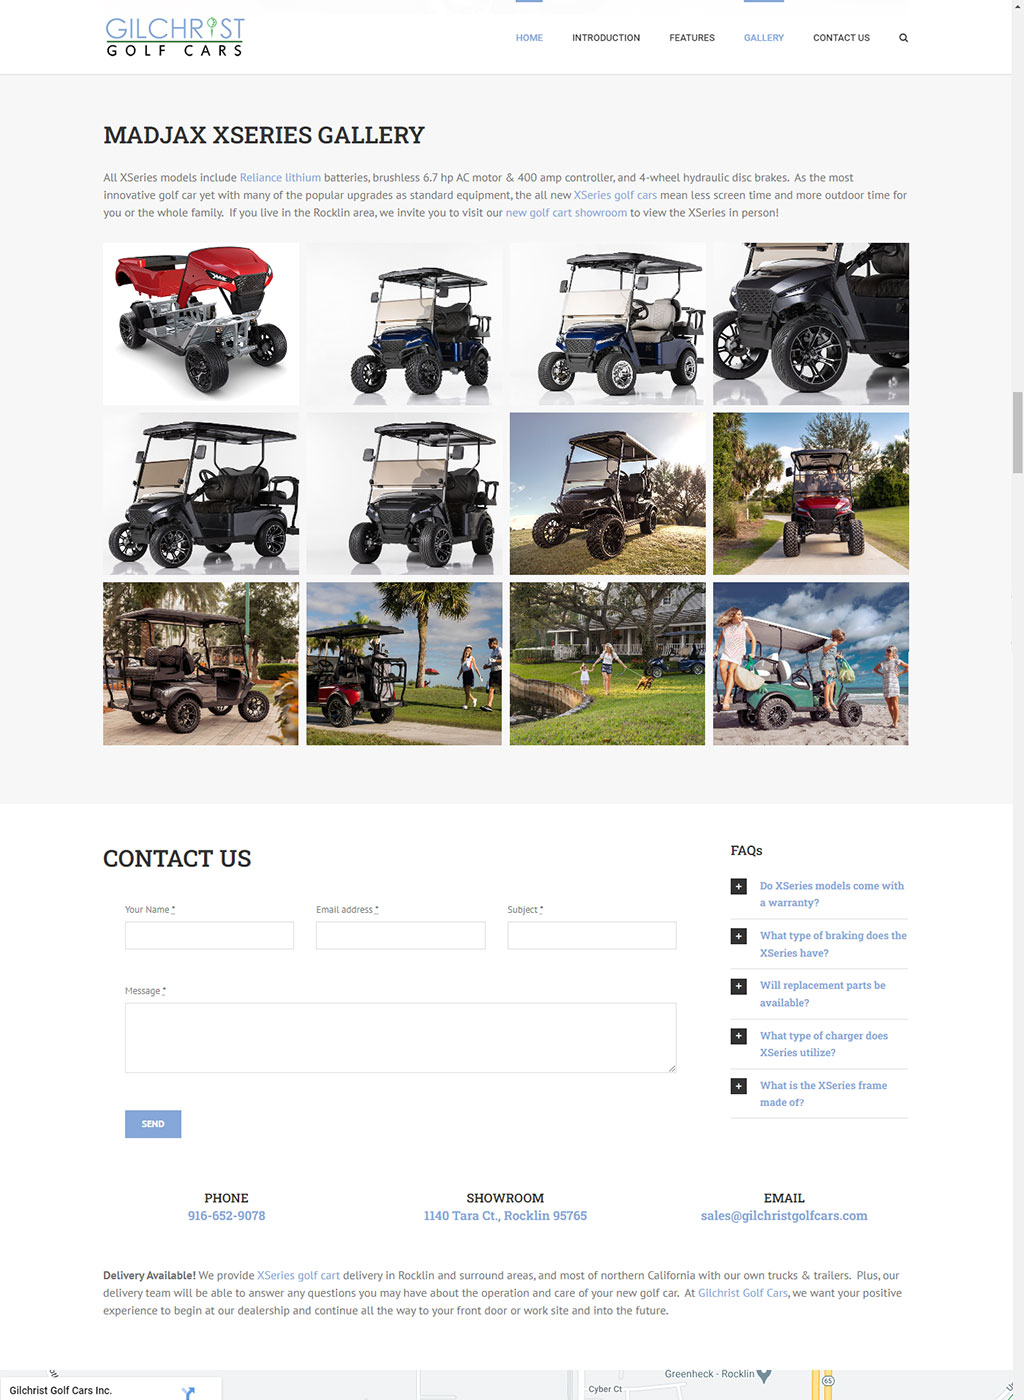 Website developed for XSeries Golf Carts